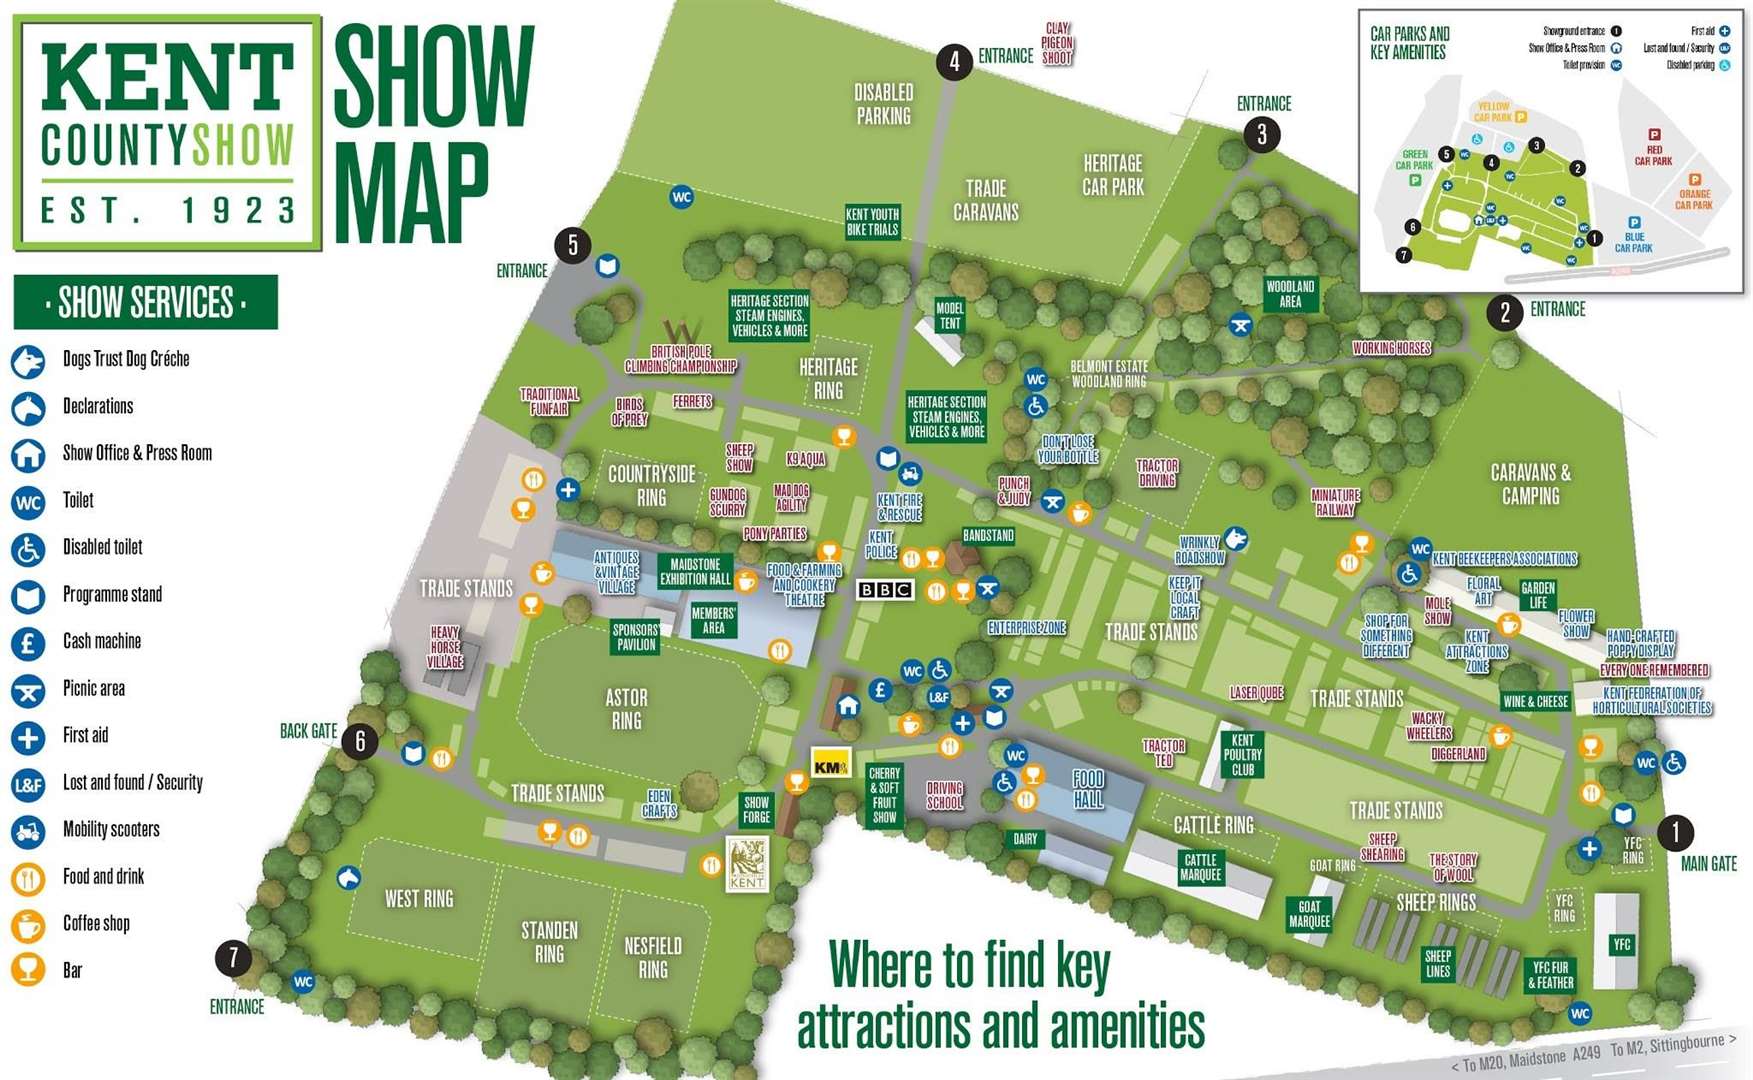 Kent County Show map